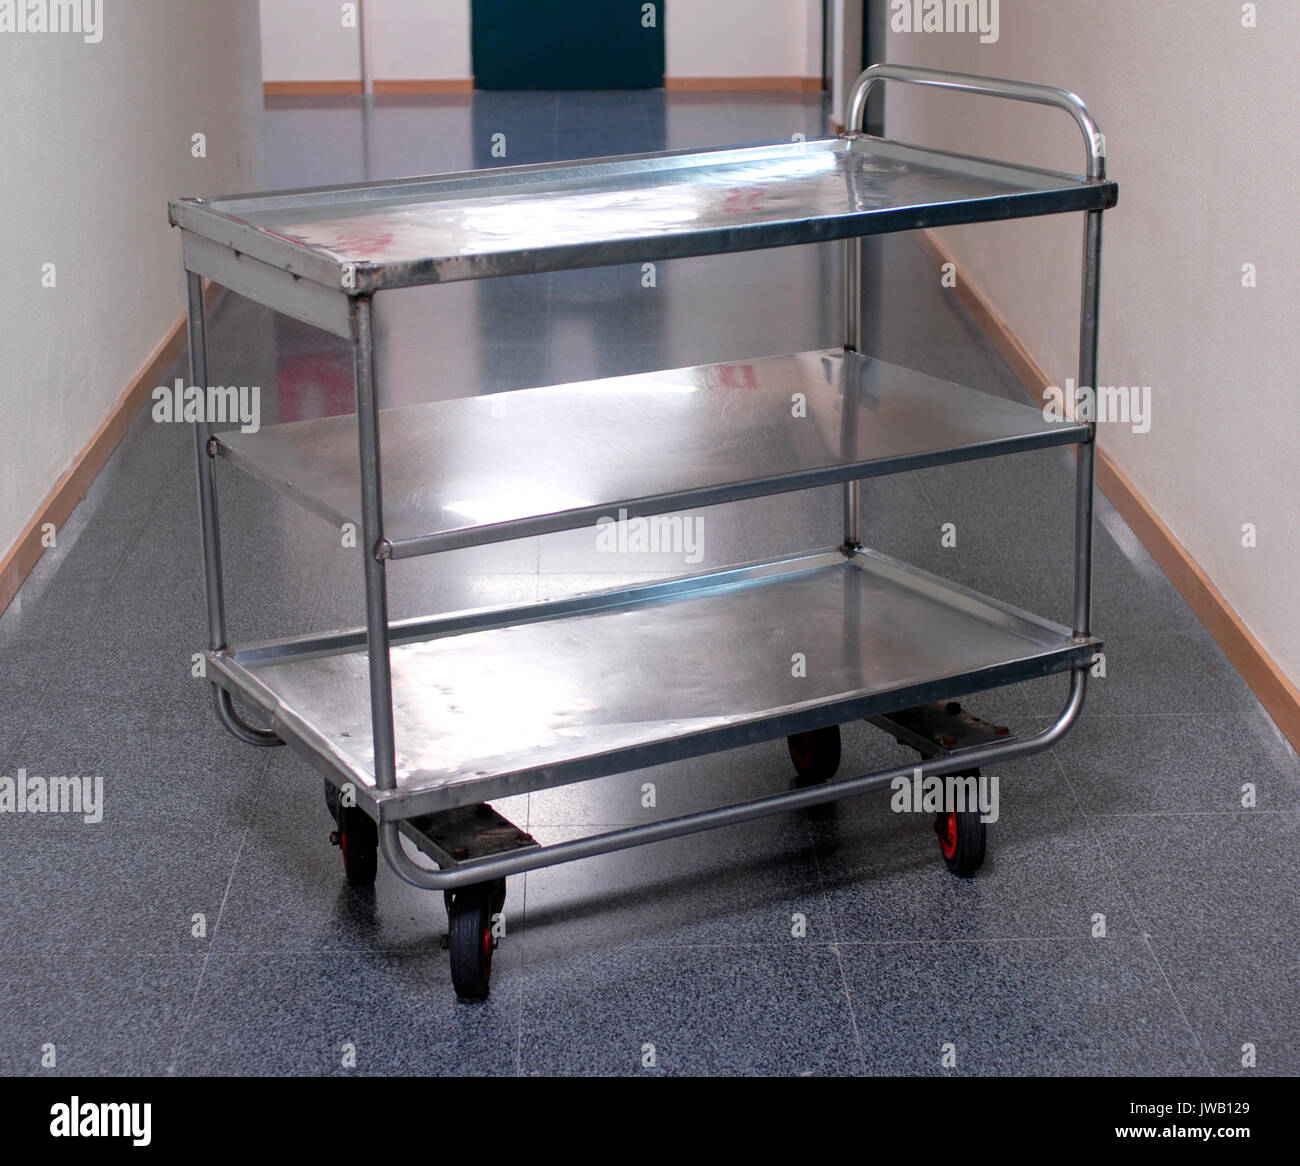 Tray, trolley with wheels for kitchens, stainless steel Stock Photo